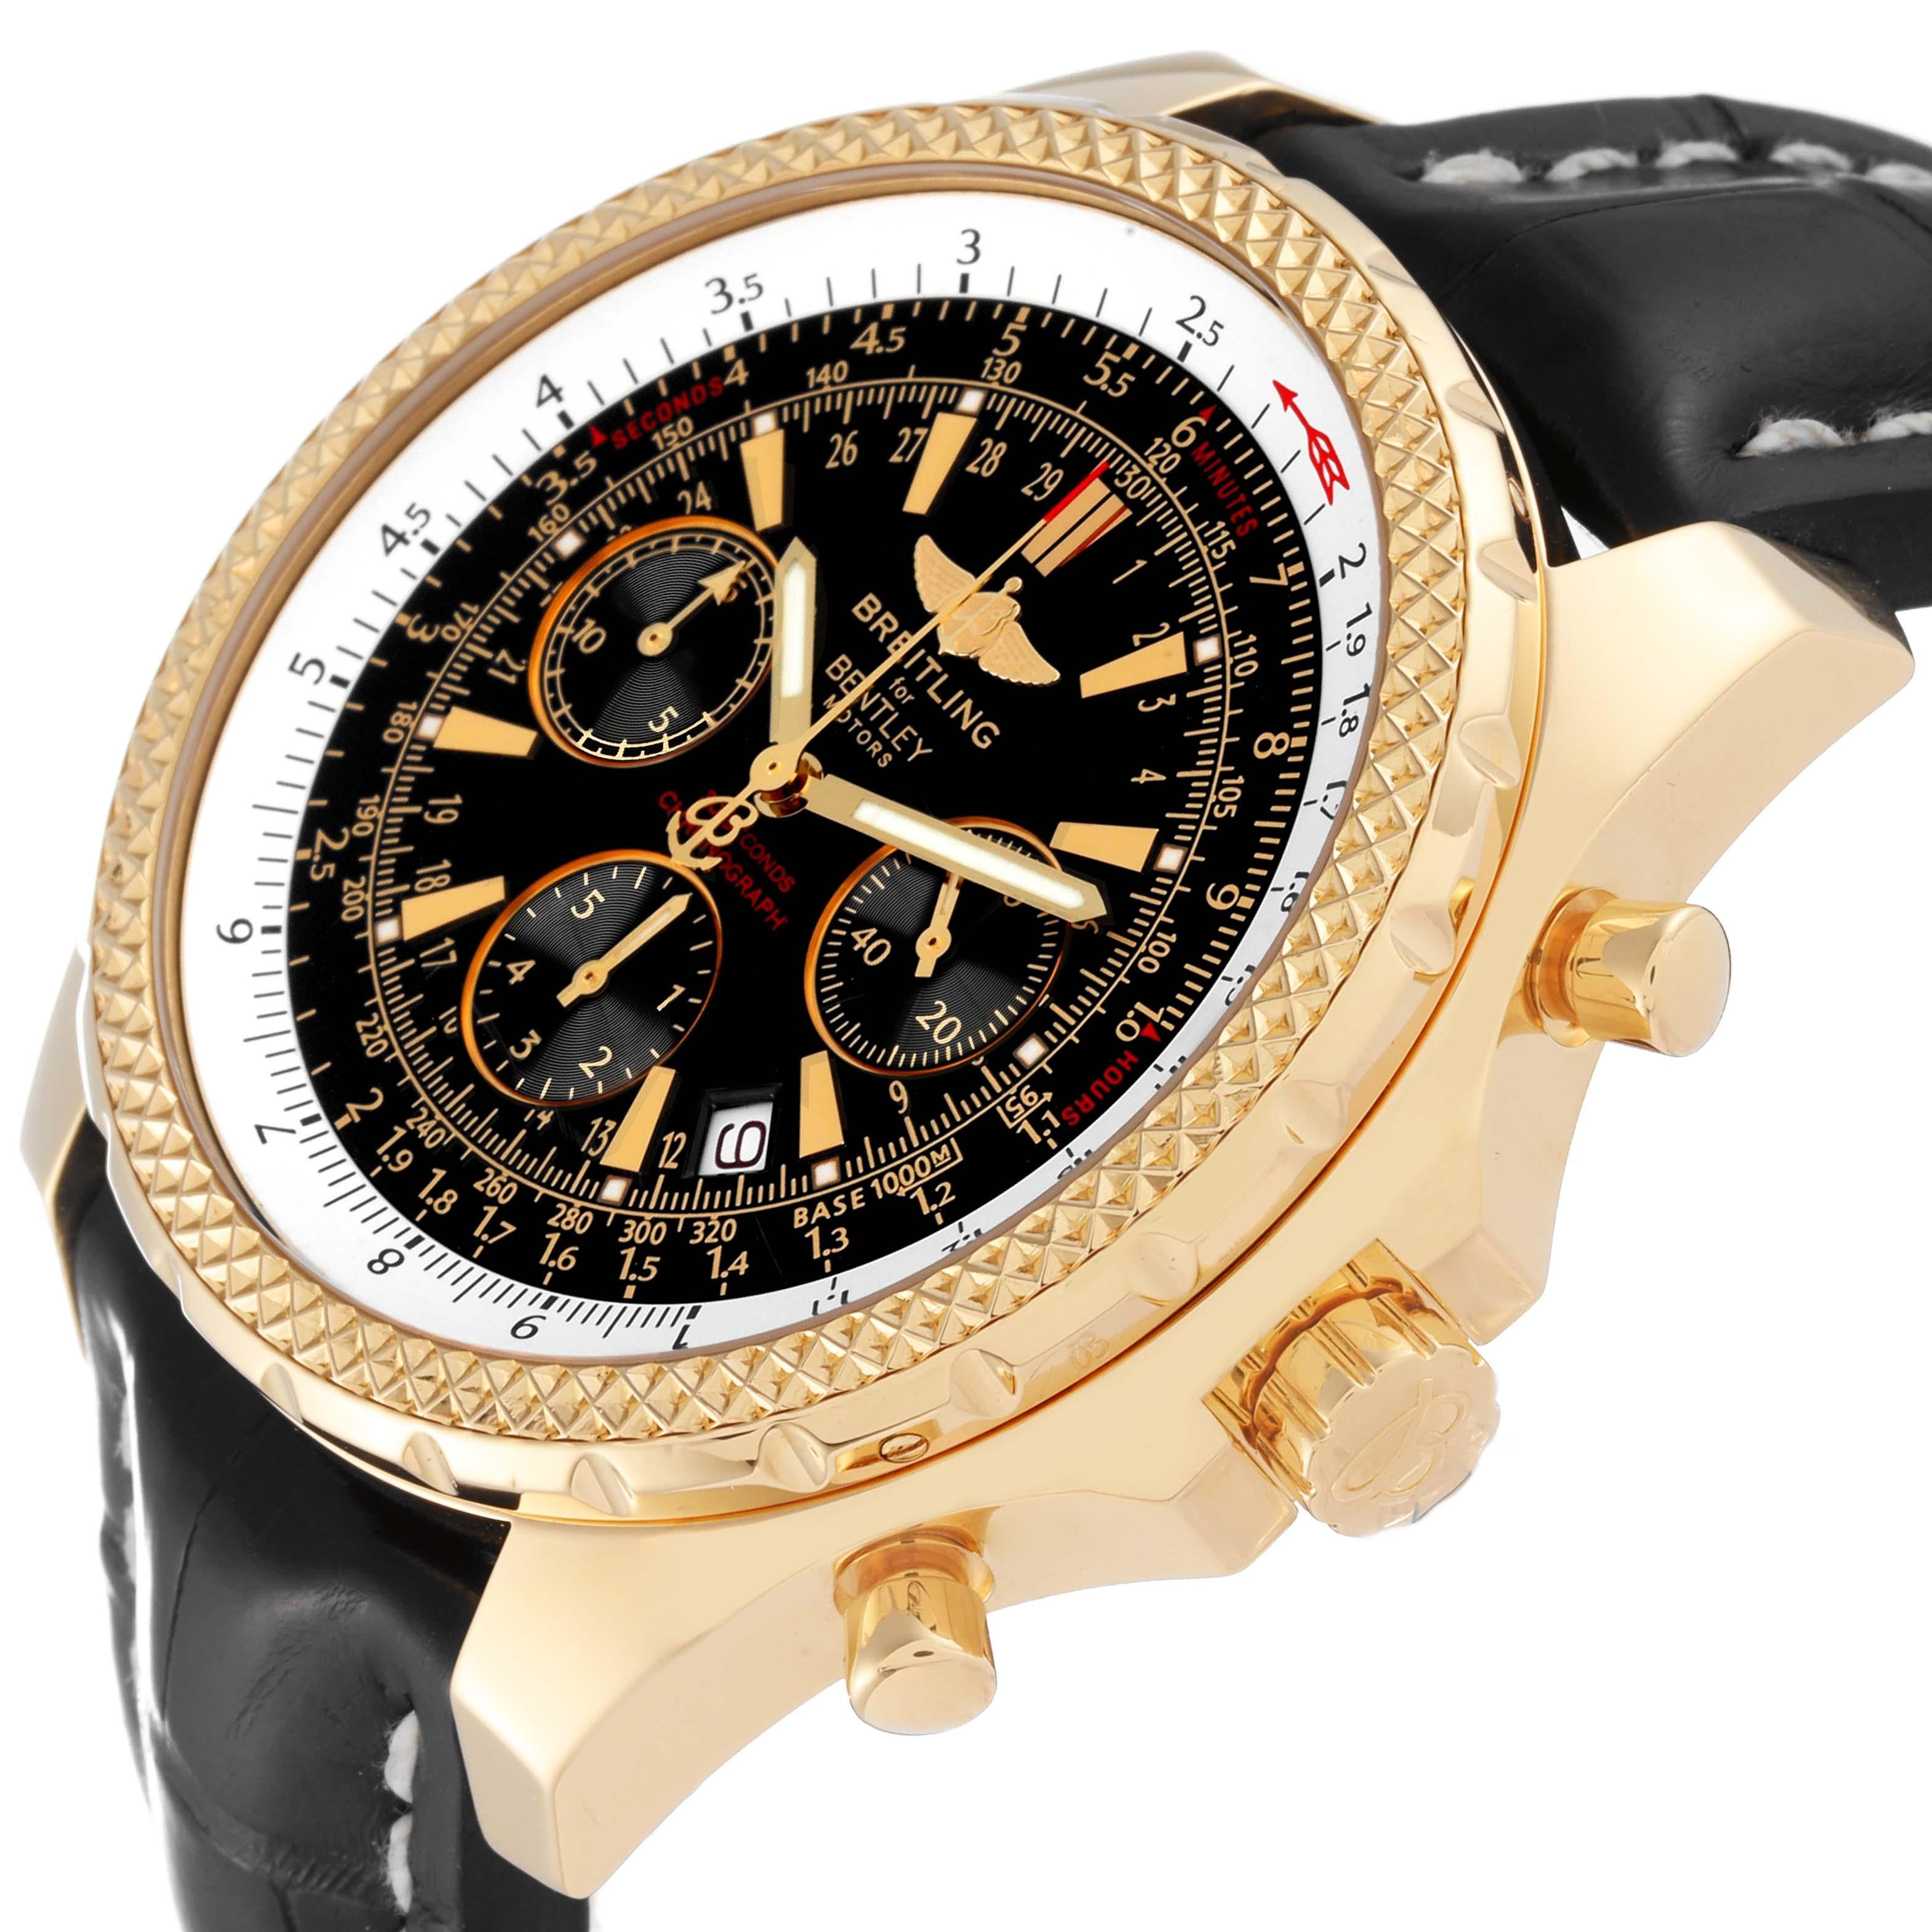 Breitling Bentley Yellow Gold Black Dial Chronograph Mens Watch K25362 For Sale 1